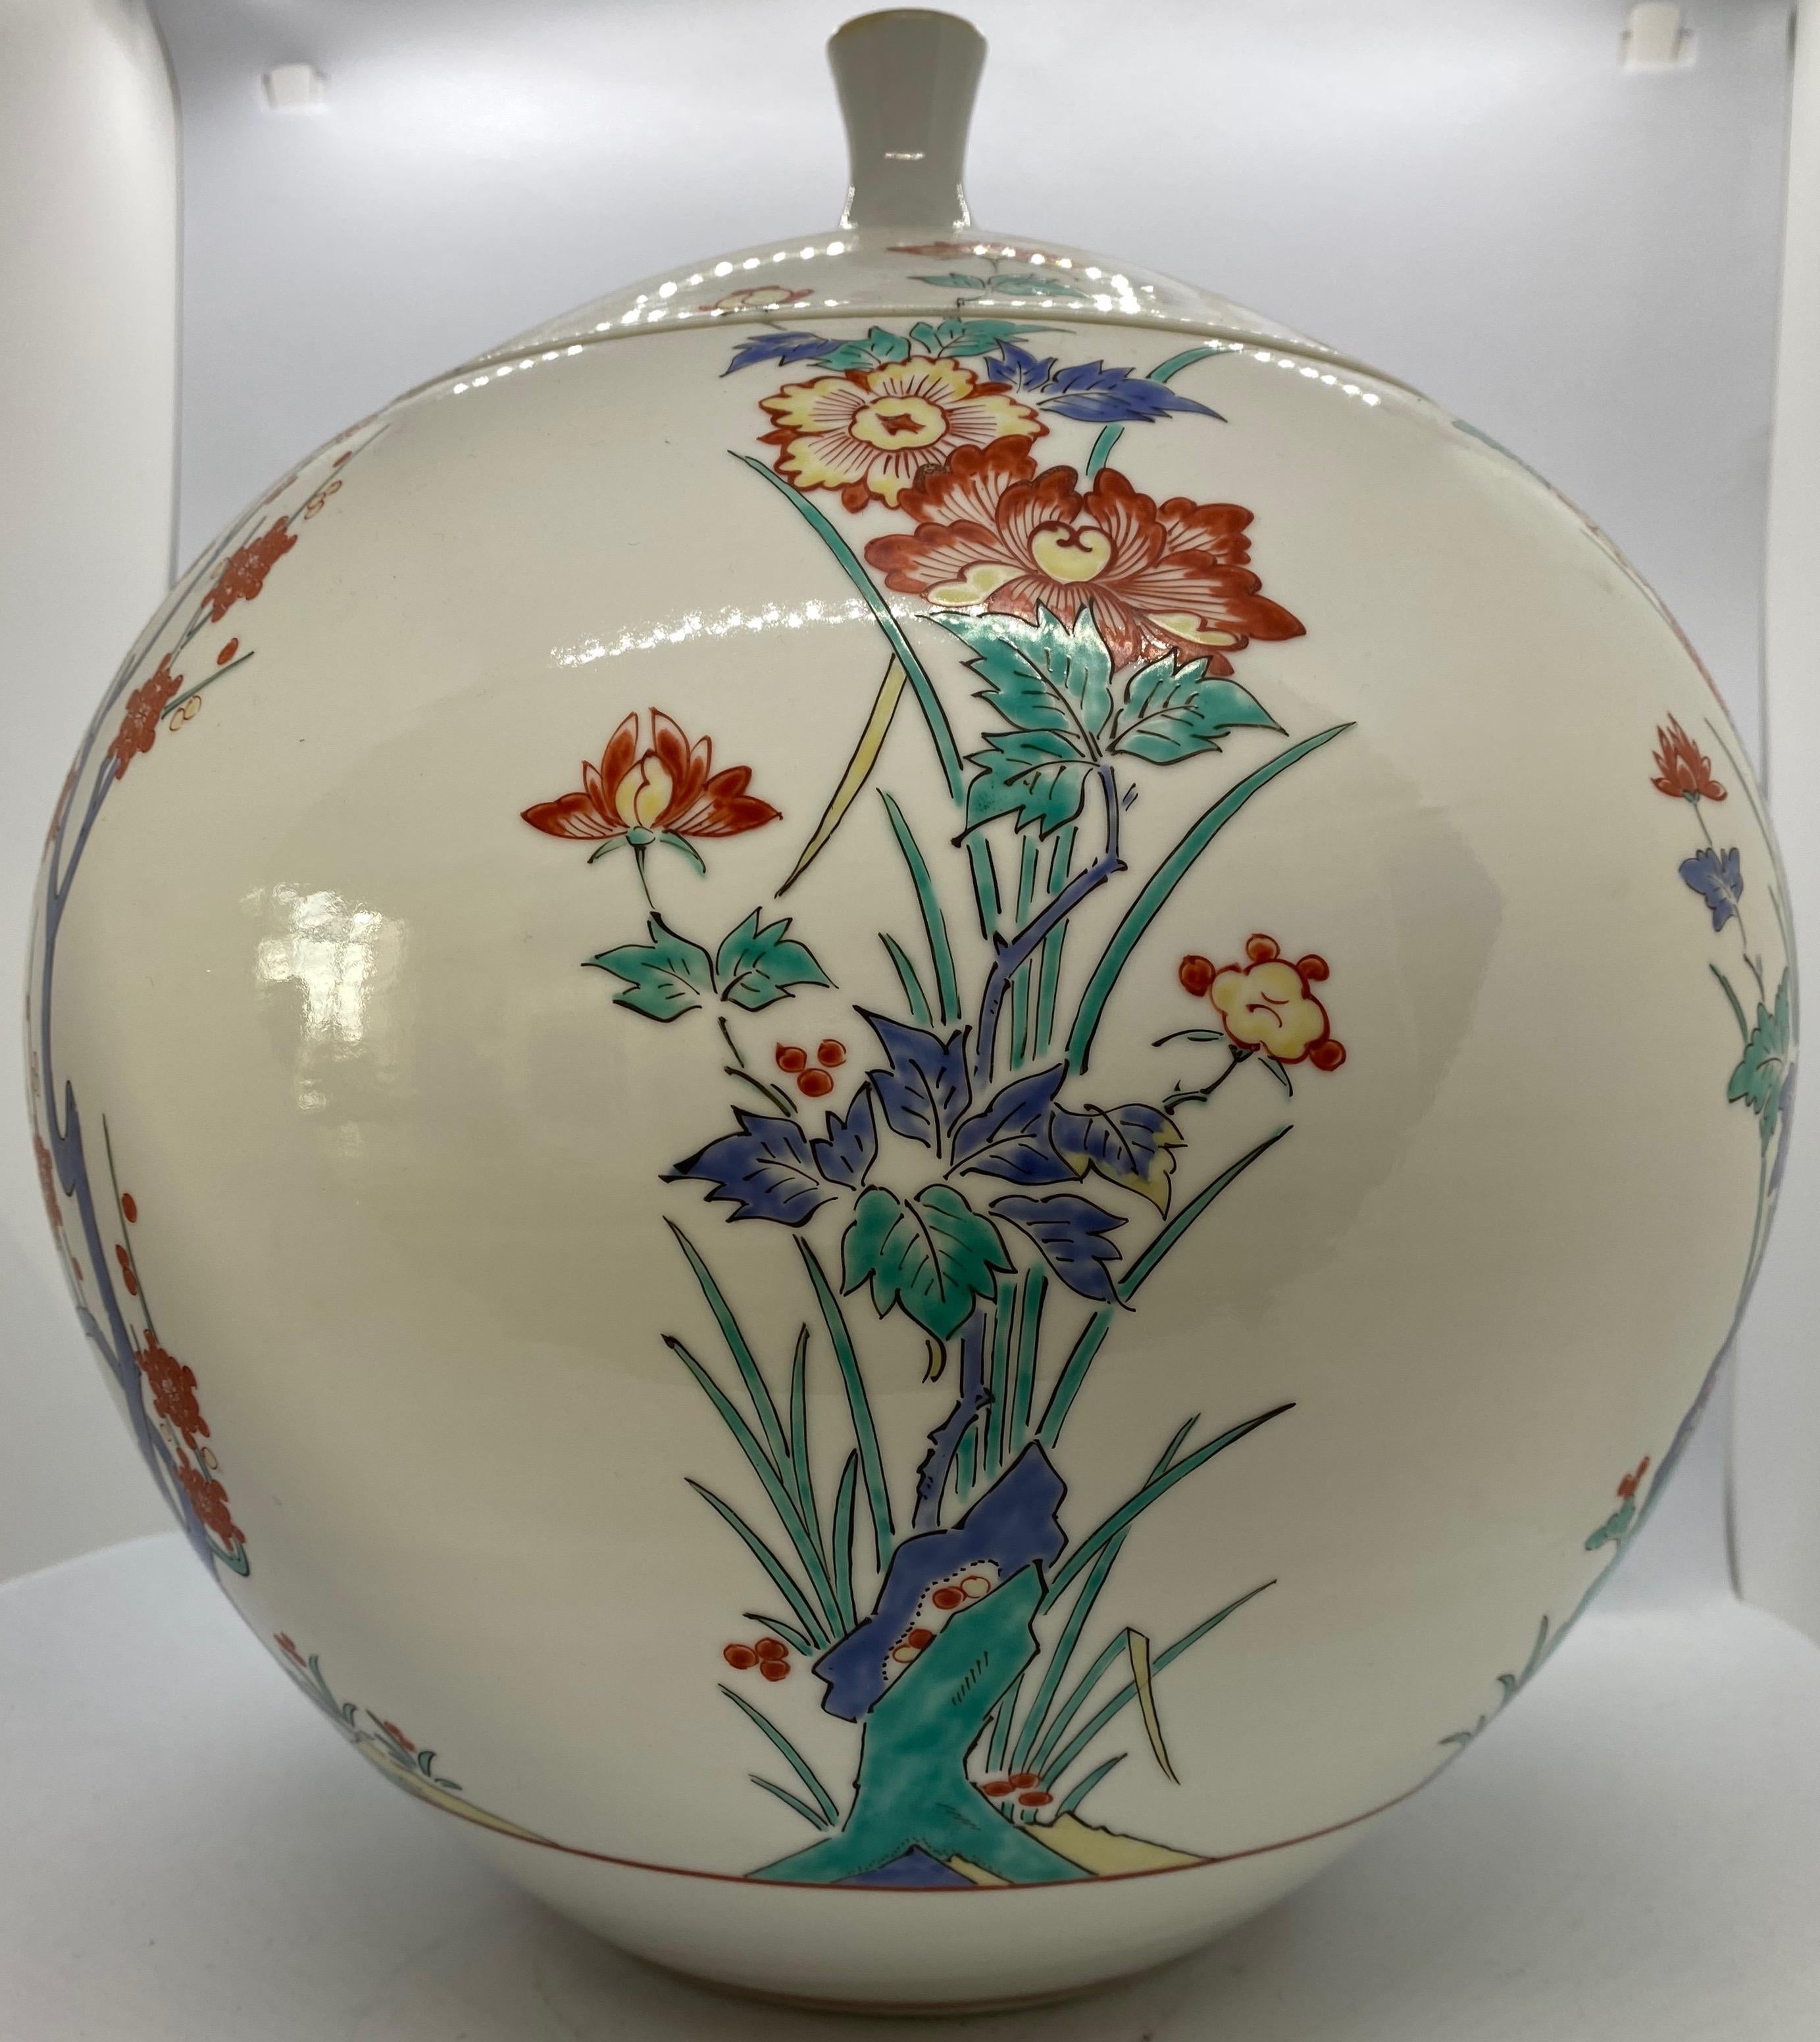 A fine and large Japanese vase in a fantastic shape. The painting goes over the vases side up on the lid so the lid has a specific place of wow to be placed.